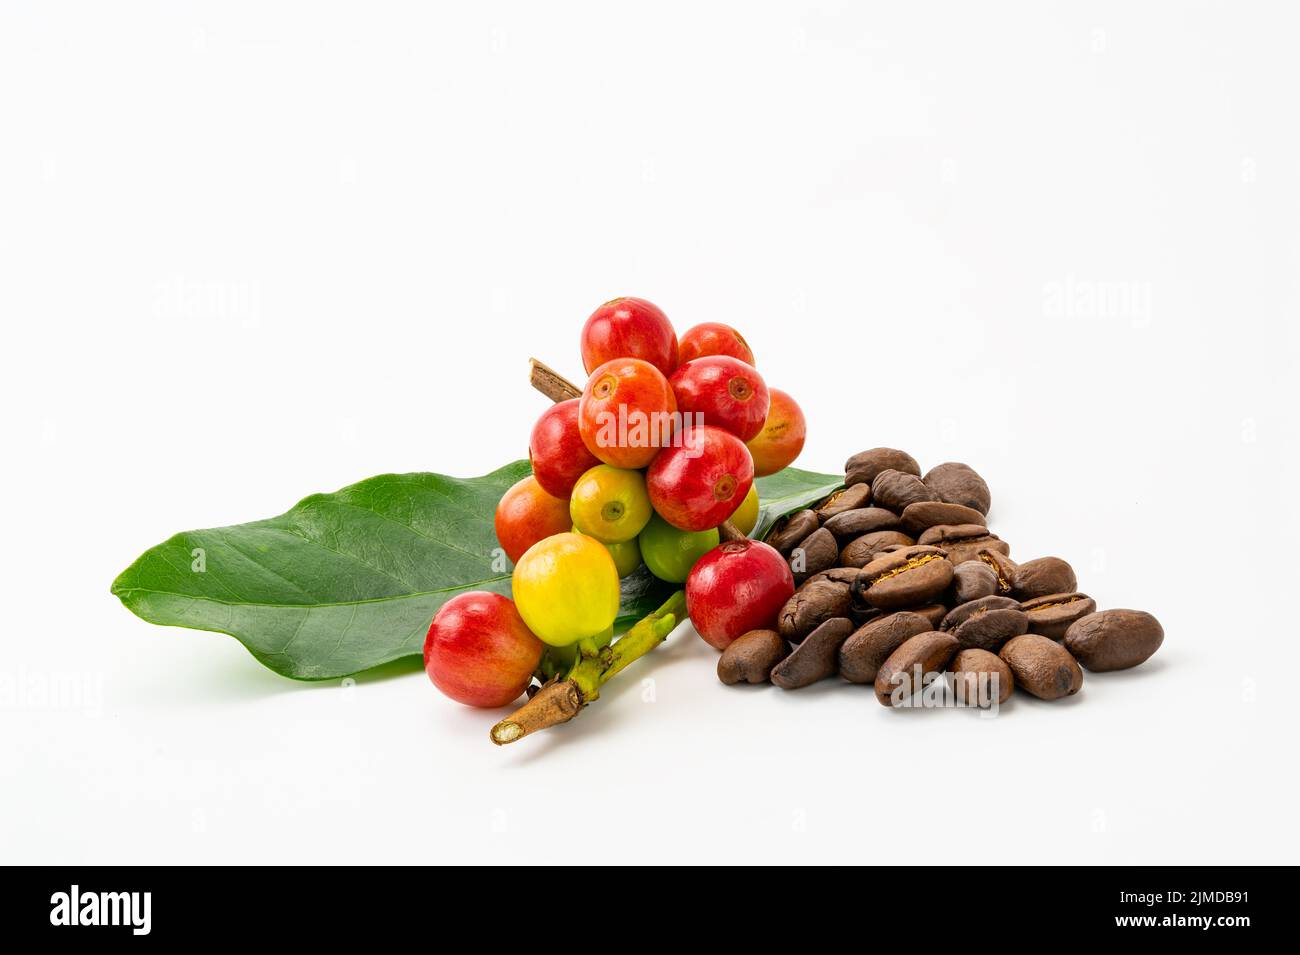 Bunch of arabica coffee fruit with green leaf and pile of roasted coffee beans on white background. Stock Photo